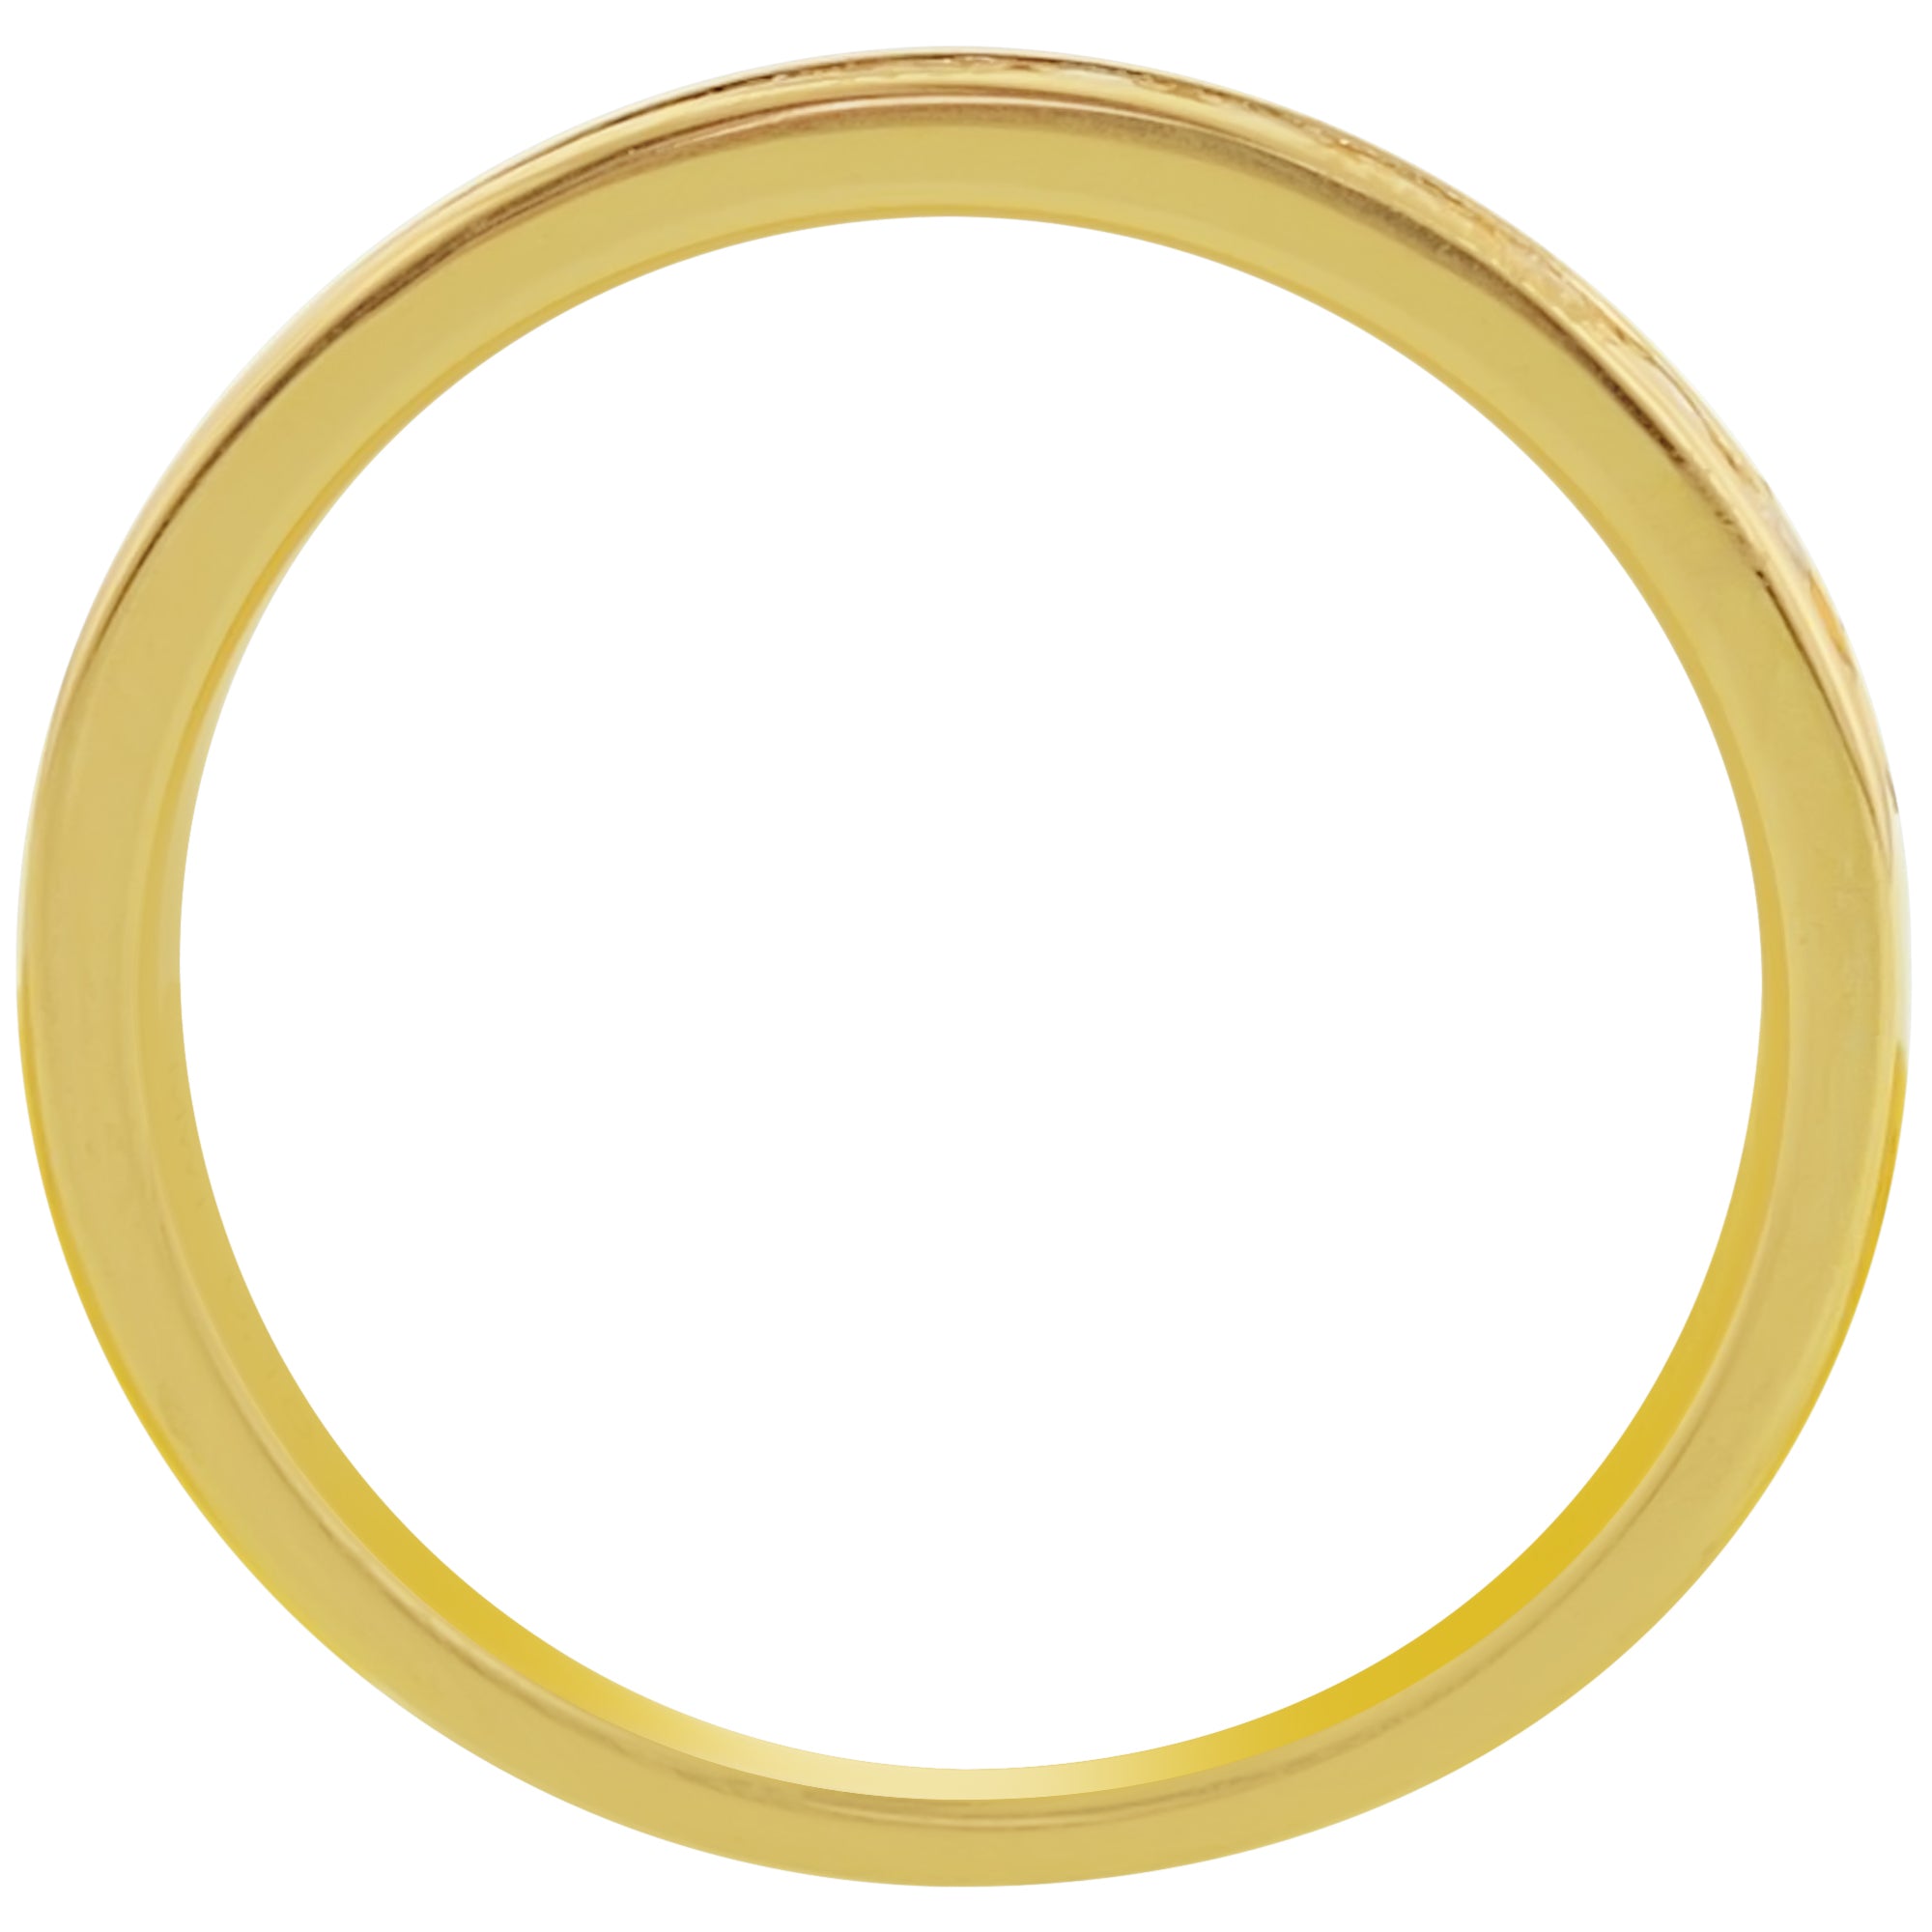 Northern Star Diamond Anniversary Band in 14kt Yellow Gold (1/5ct tw)